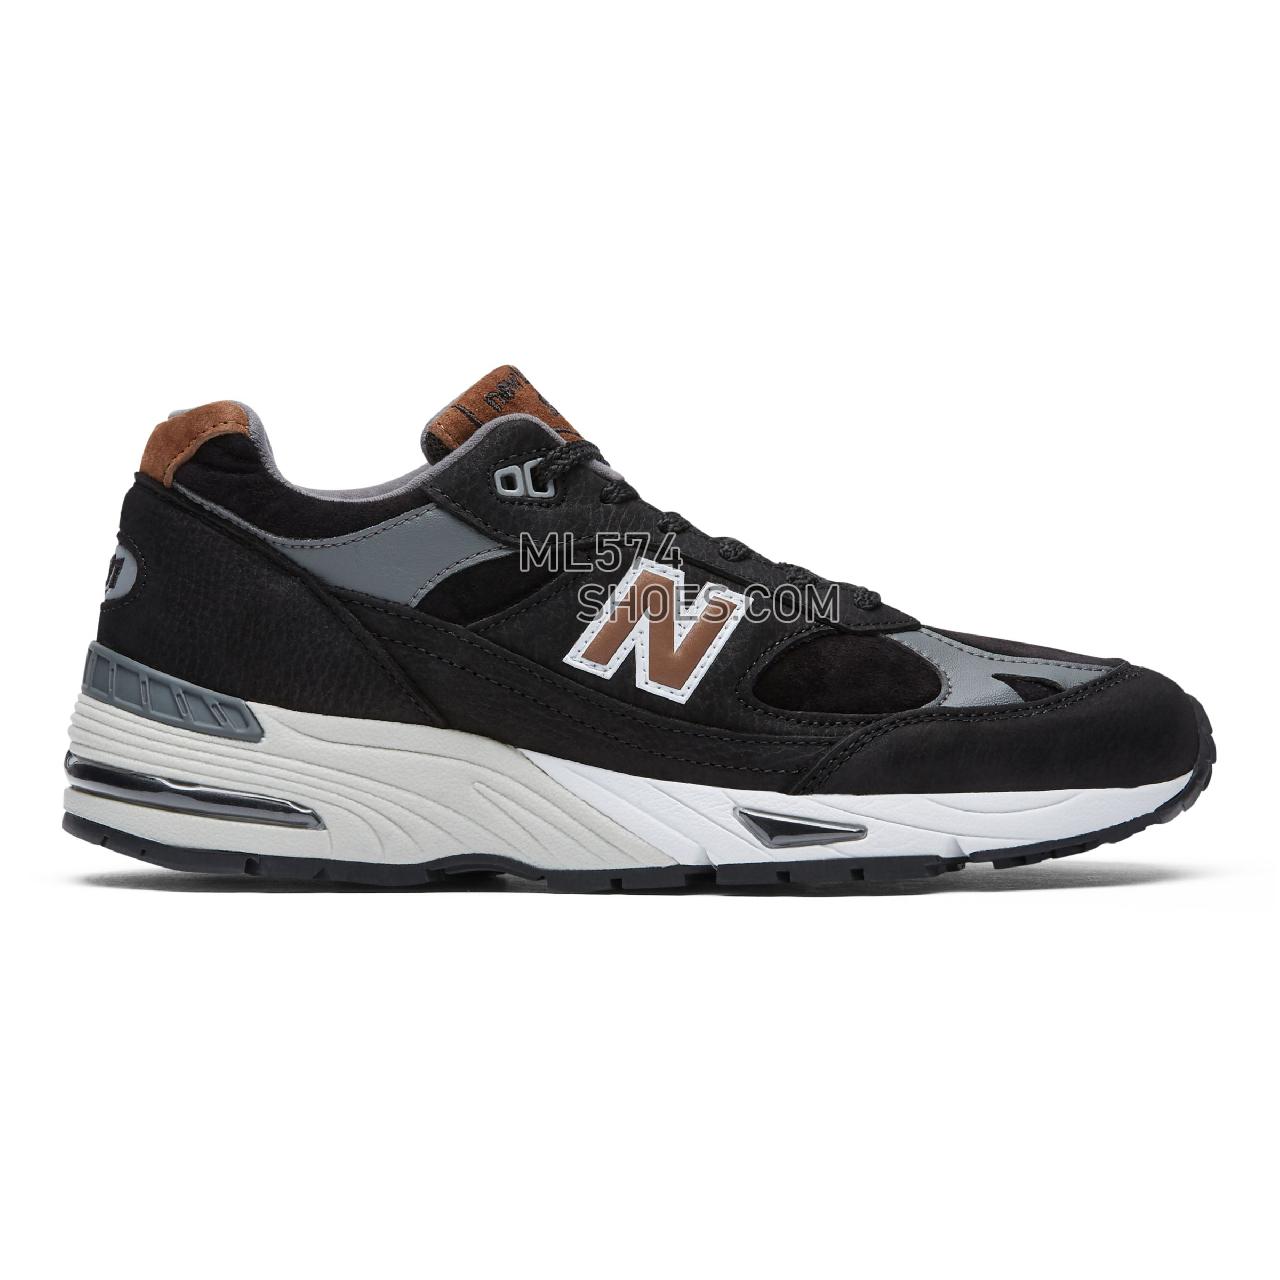 New Balance Made in UK 991 - Men's Made in UK 991 ML991V1-27419-M - Black with Brown - M991KT